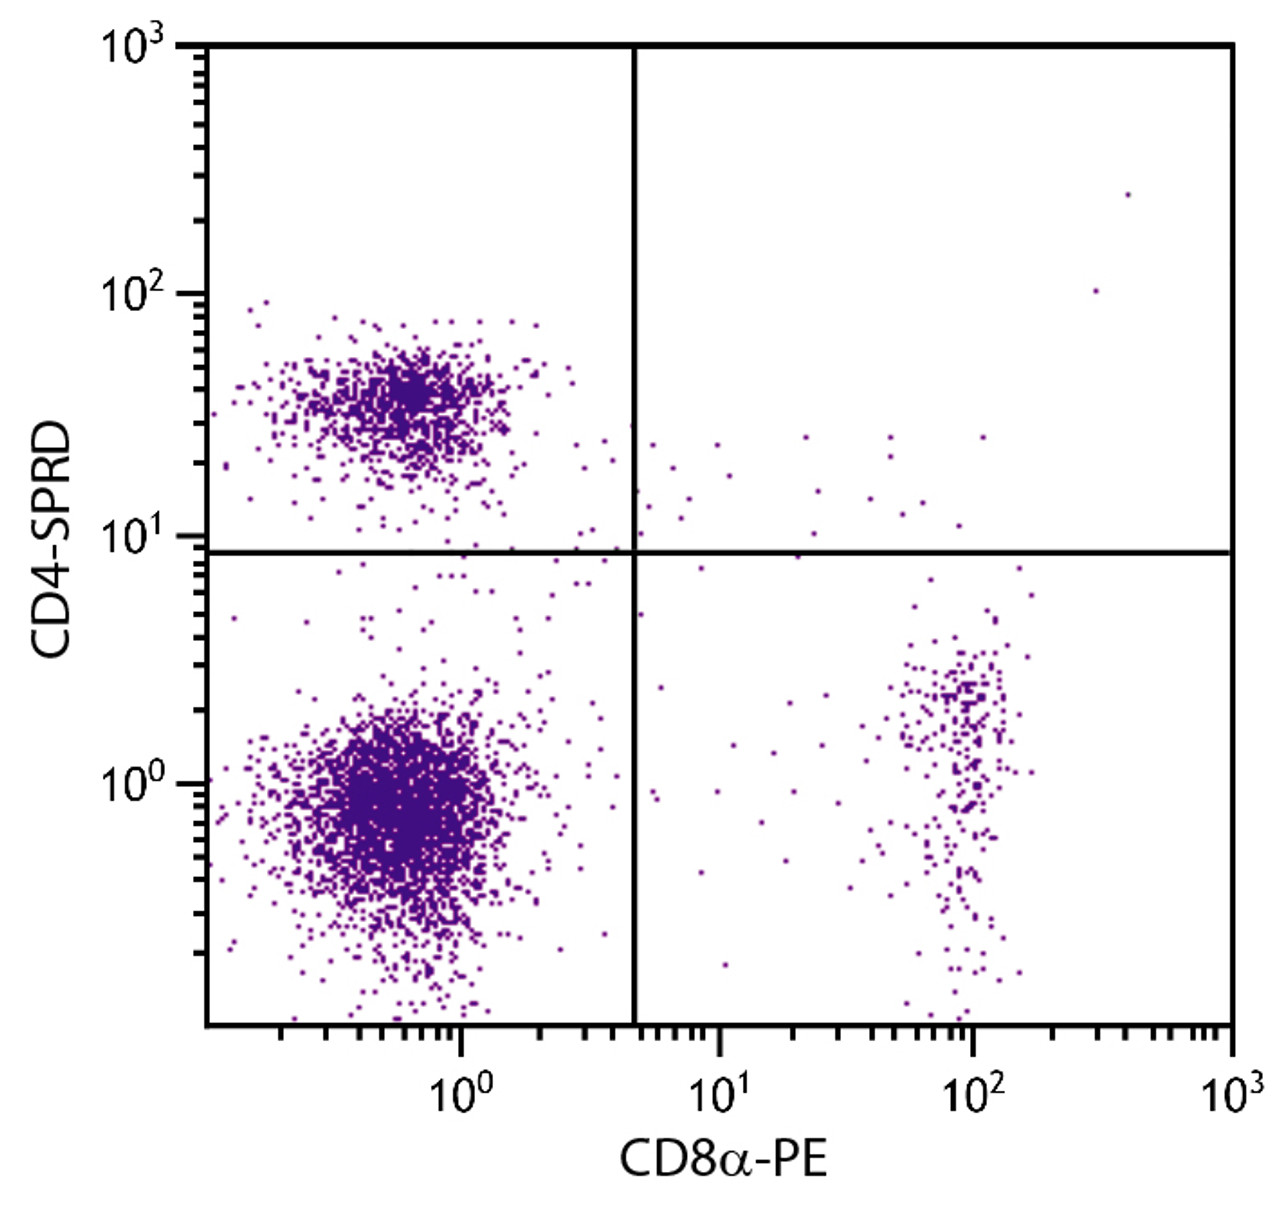 BALB/c mouse splenocytes were stained with Rat Anti-Mouse CD4-SPRD (Cat. No98-589) and Rat Anti-Mouse CD8?-PE .